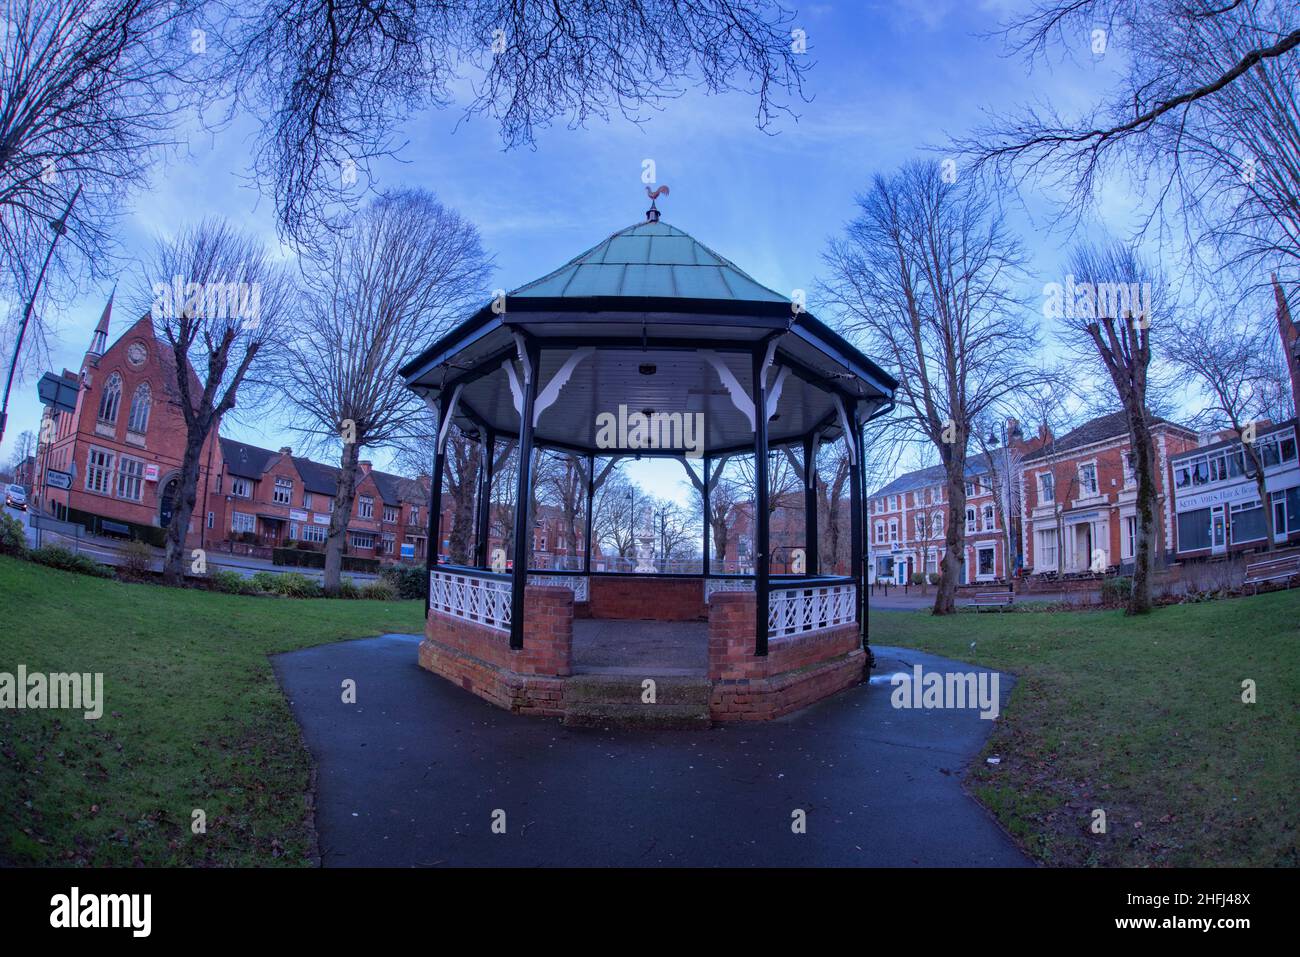 Redditch Bandstand, Church Green, Redditch. Worcestershire. Built in Church Green in 1883, the bandstand is octagonal with brick balustrades all the w Stock Photo